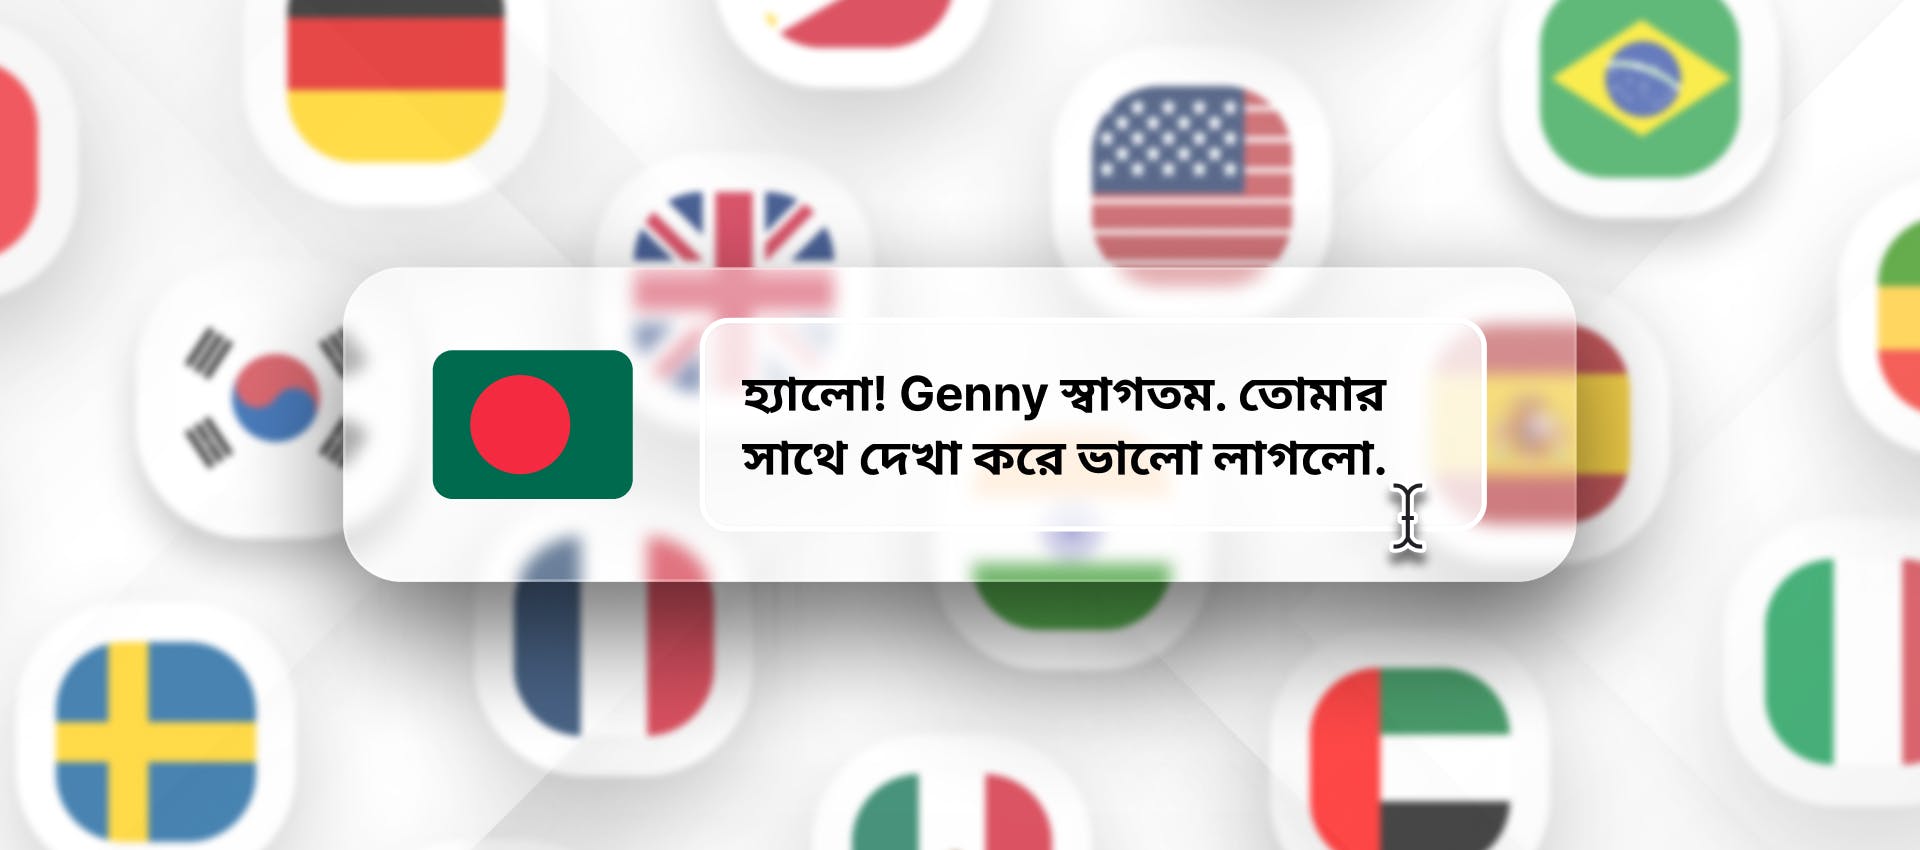 Bengali phrase for Bengali TTS generation with different flags in the background